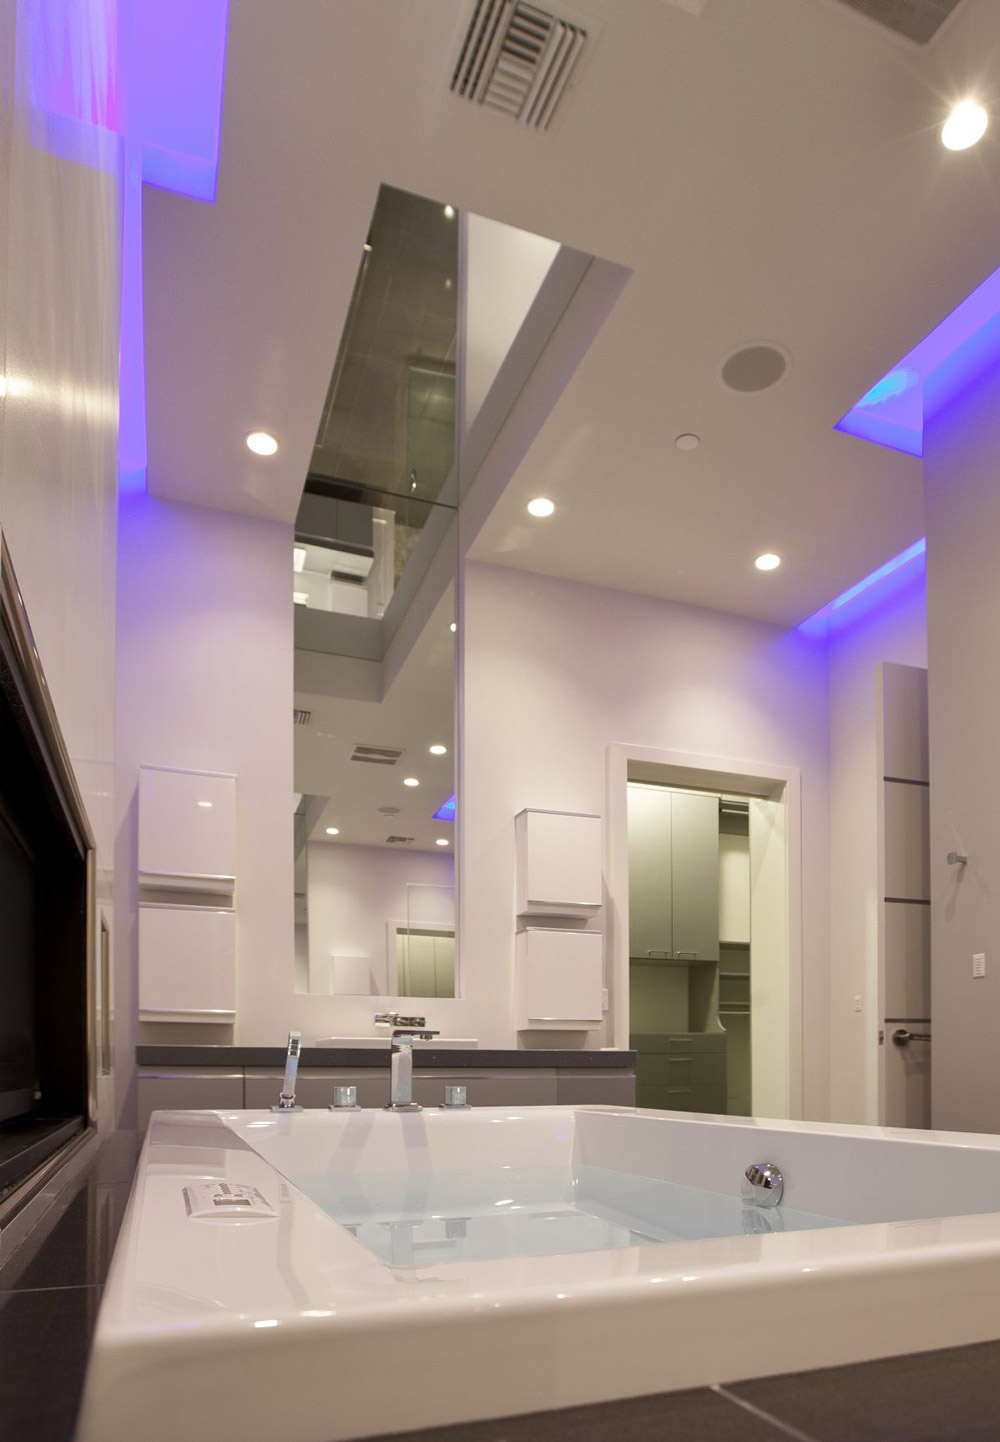 Bathroom, Large Mirror, Blue LED Lighting, Hurtado Residence in Las Vegas by Mark Tracy of Chemical Spaces